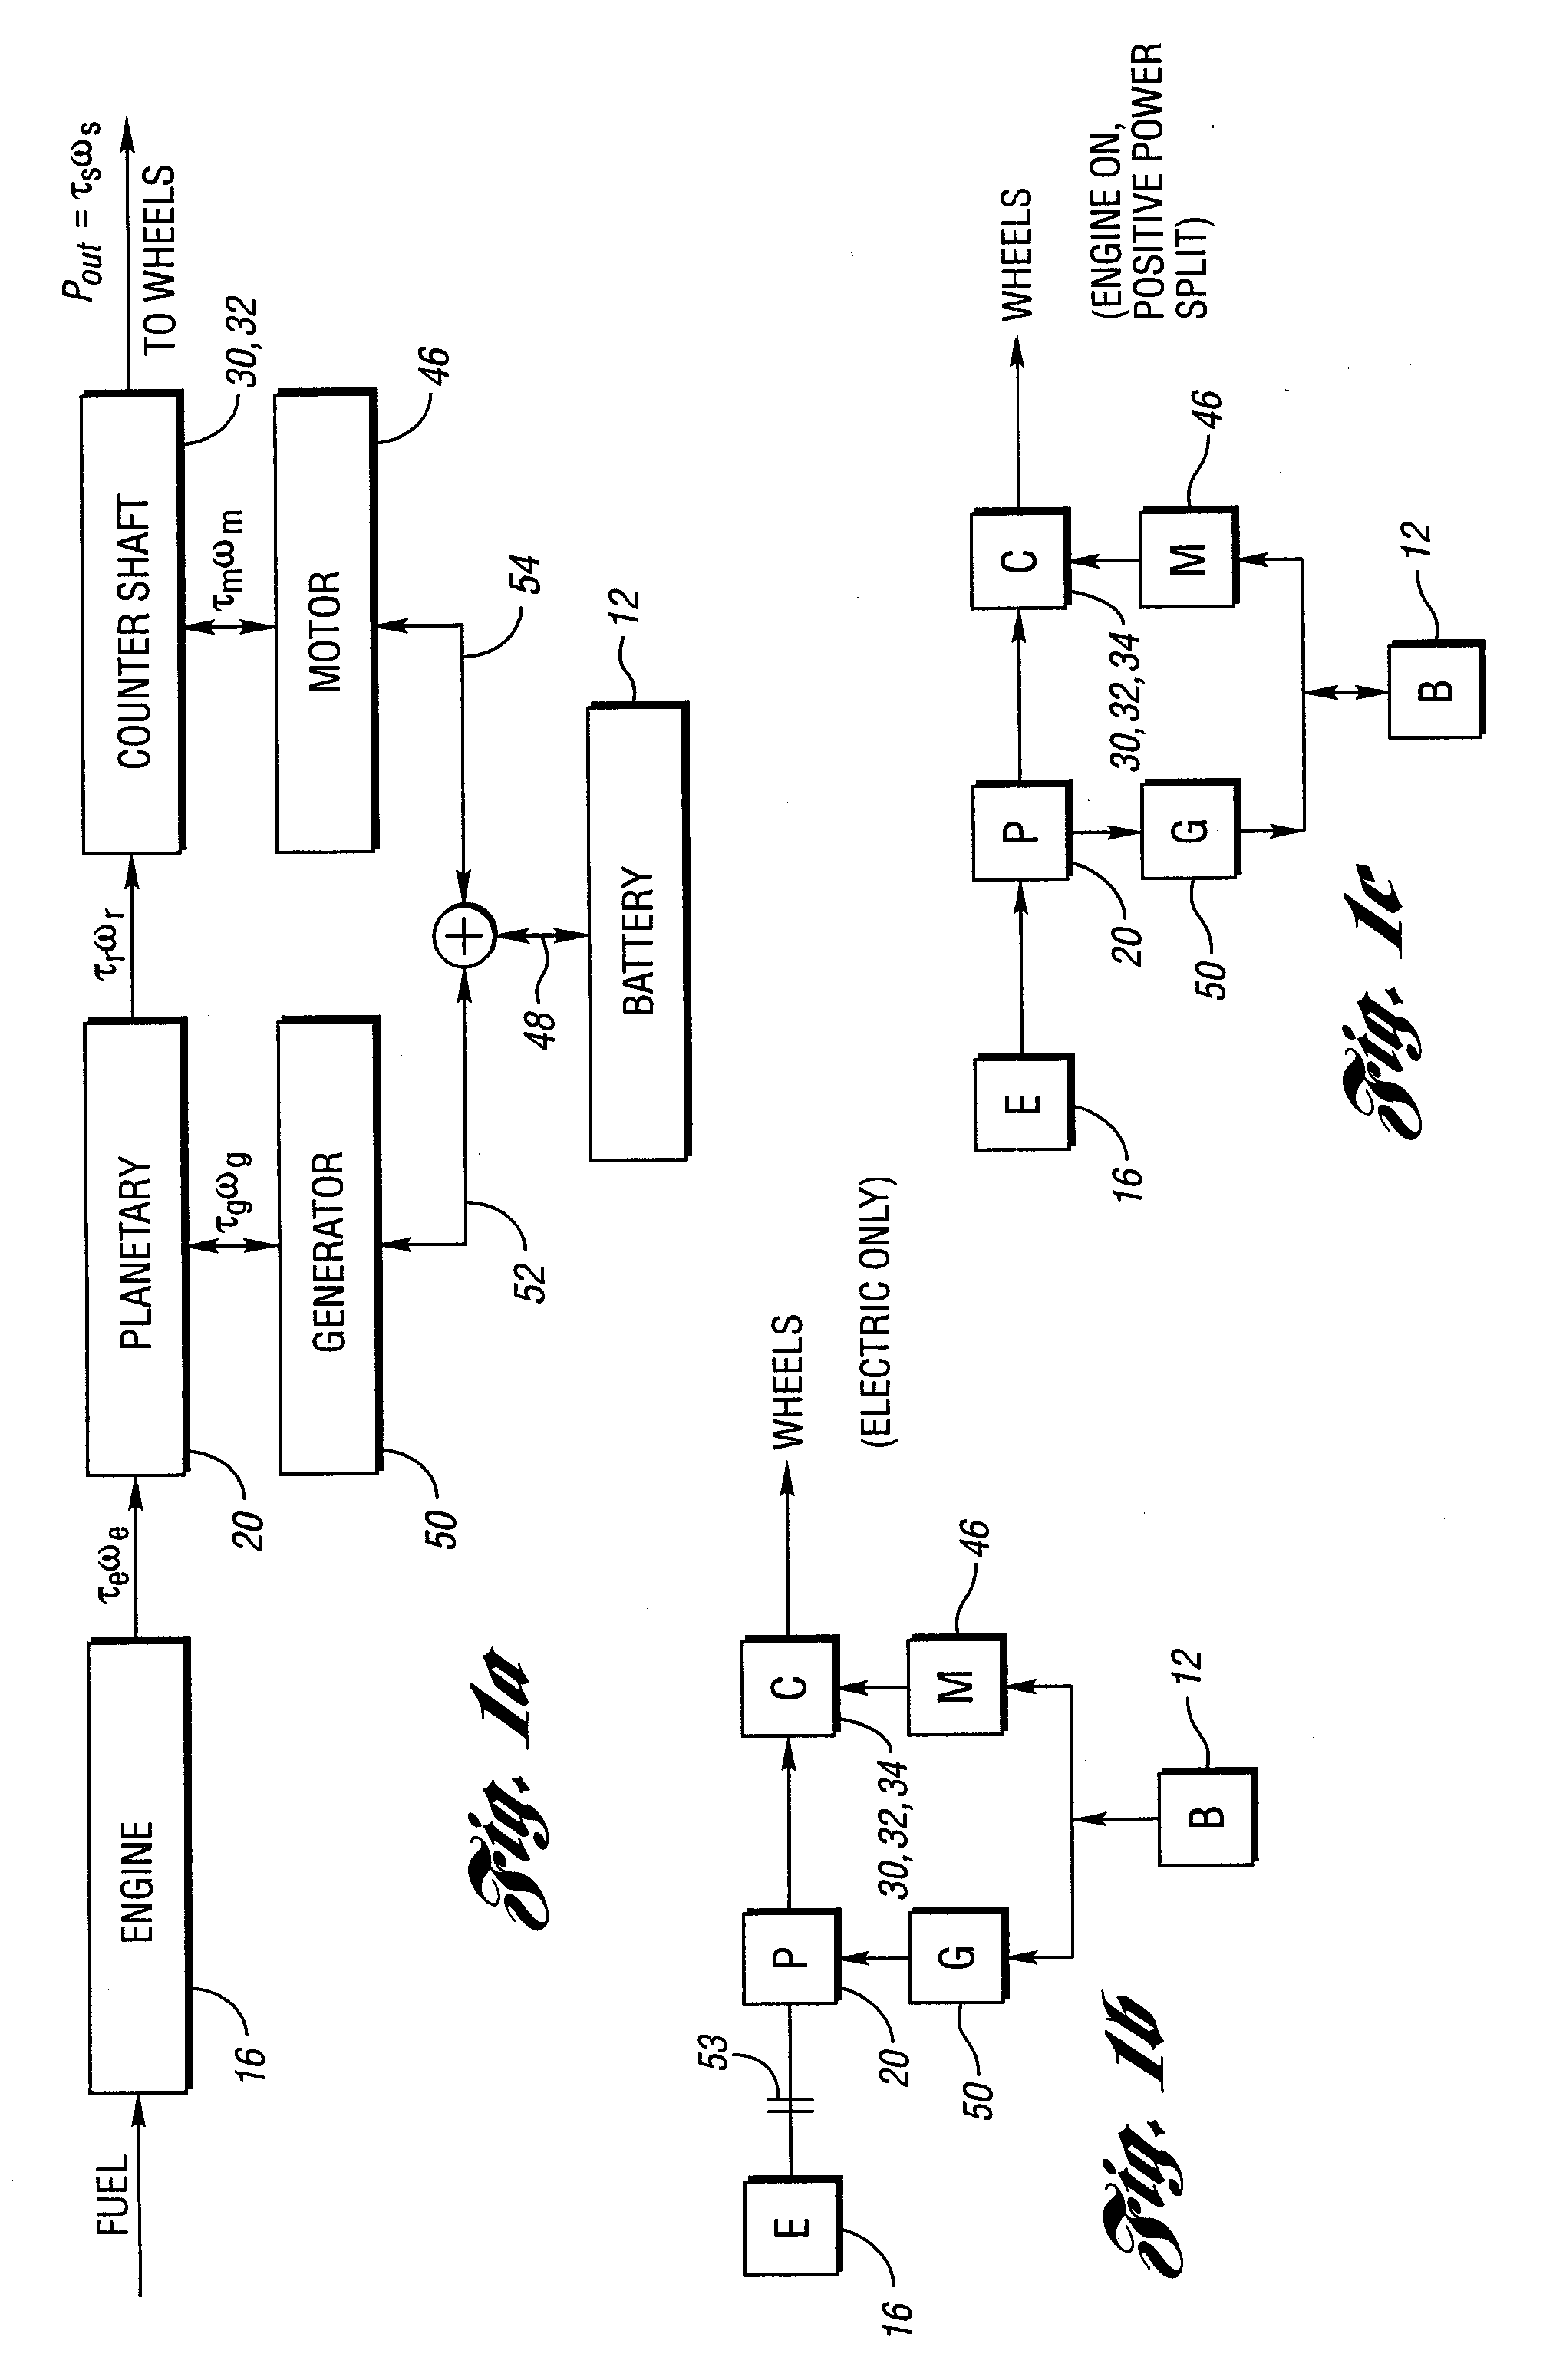 Engine Speed Control for an Engine in a Hybrid Electric Vehicle Powertrain for Improved Noise, Vibration and Harshness